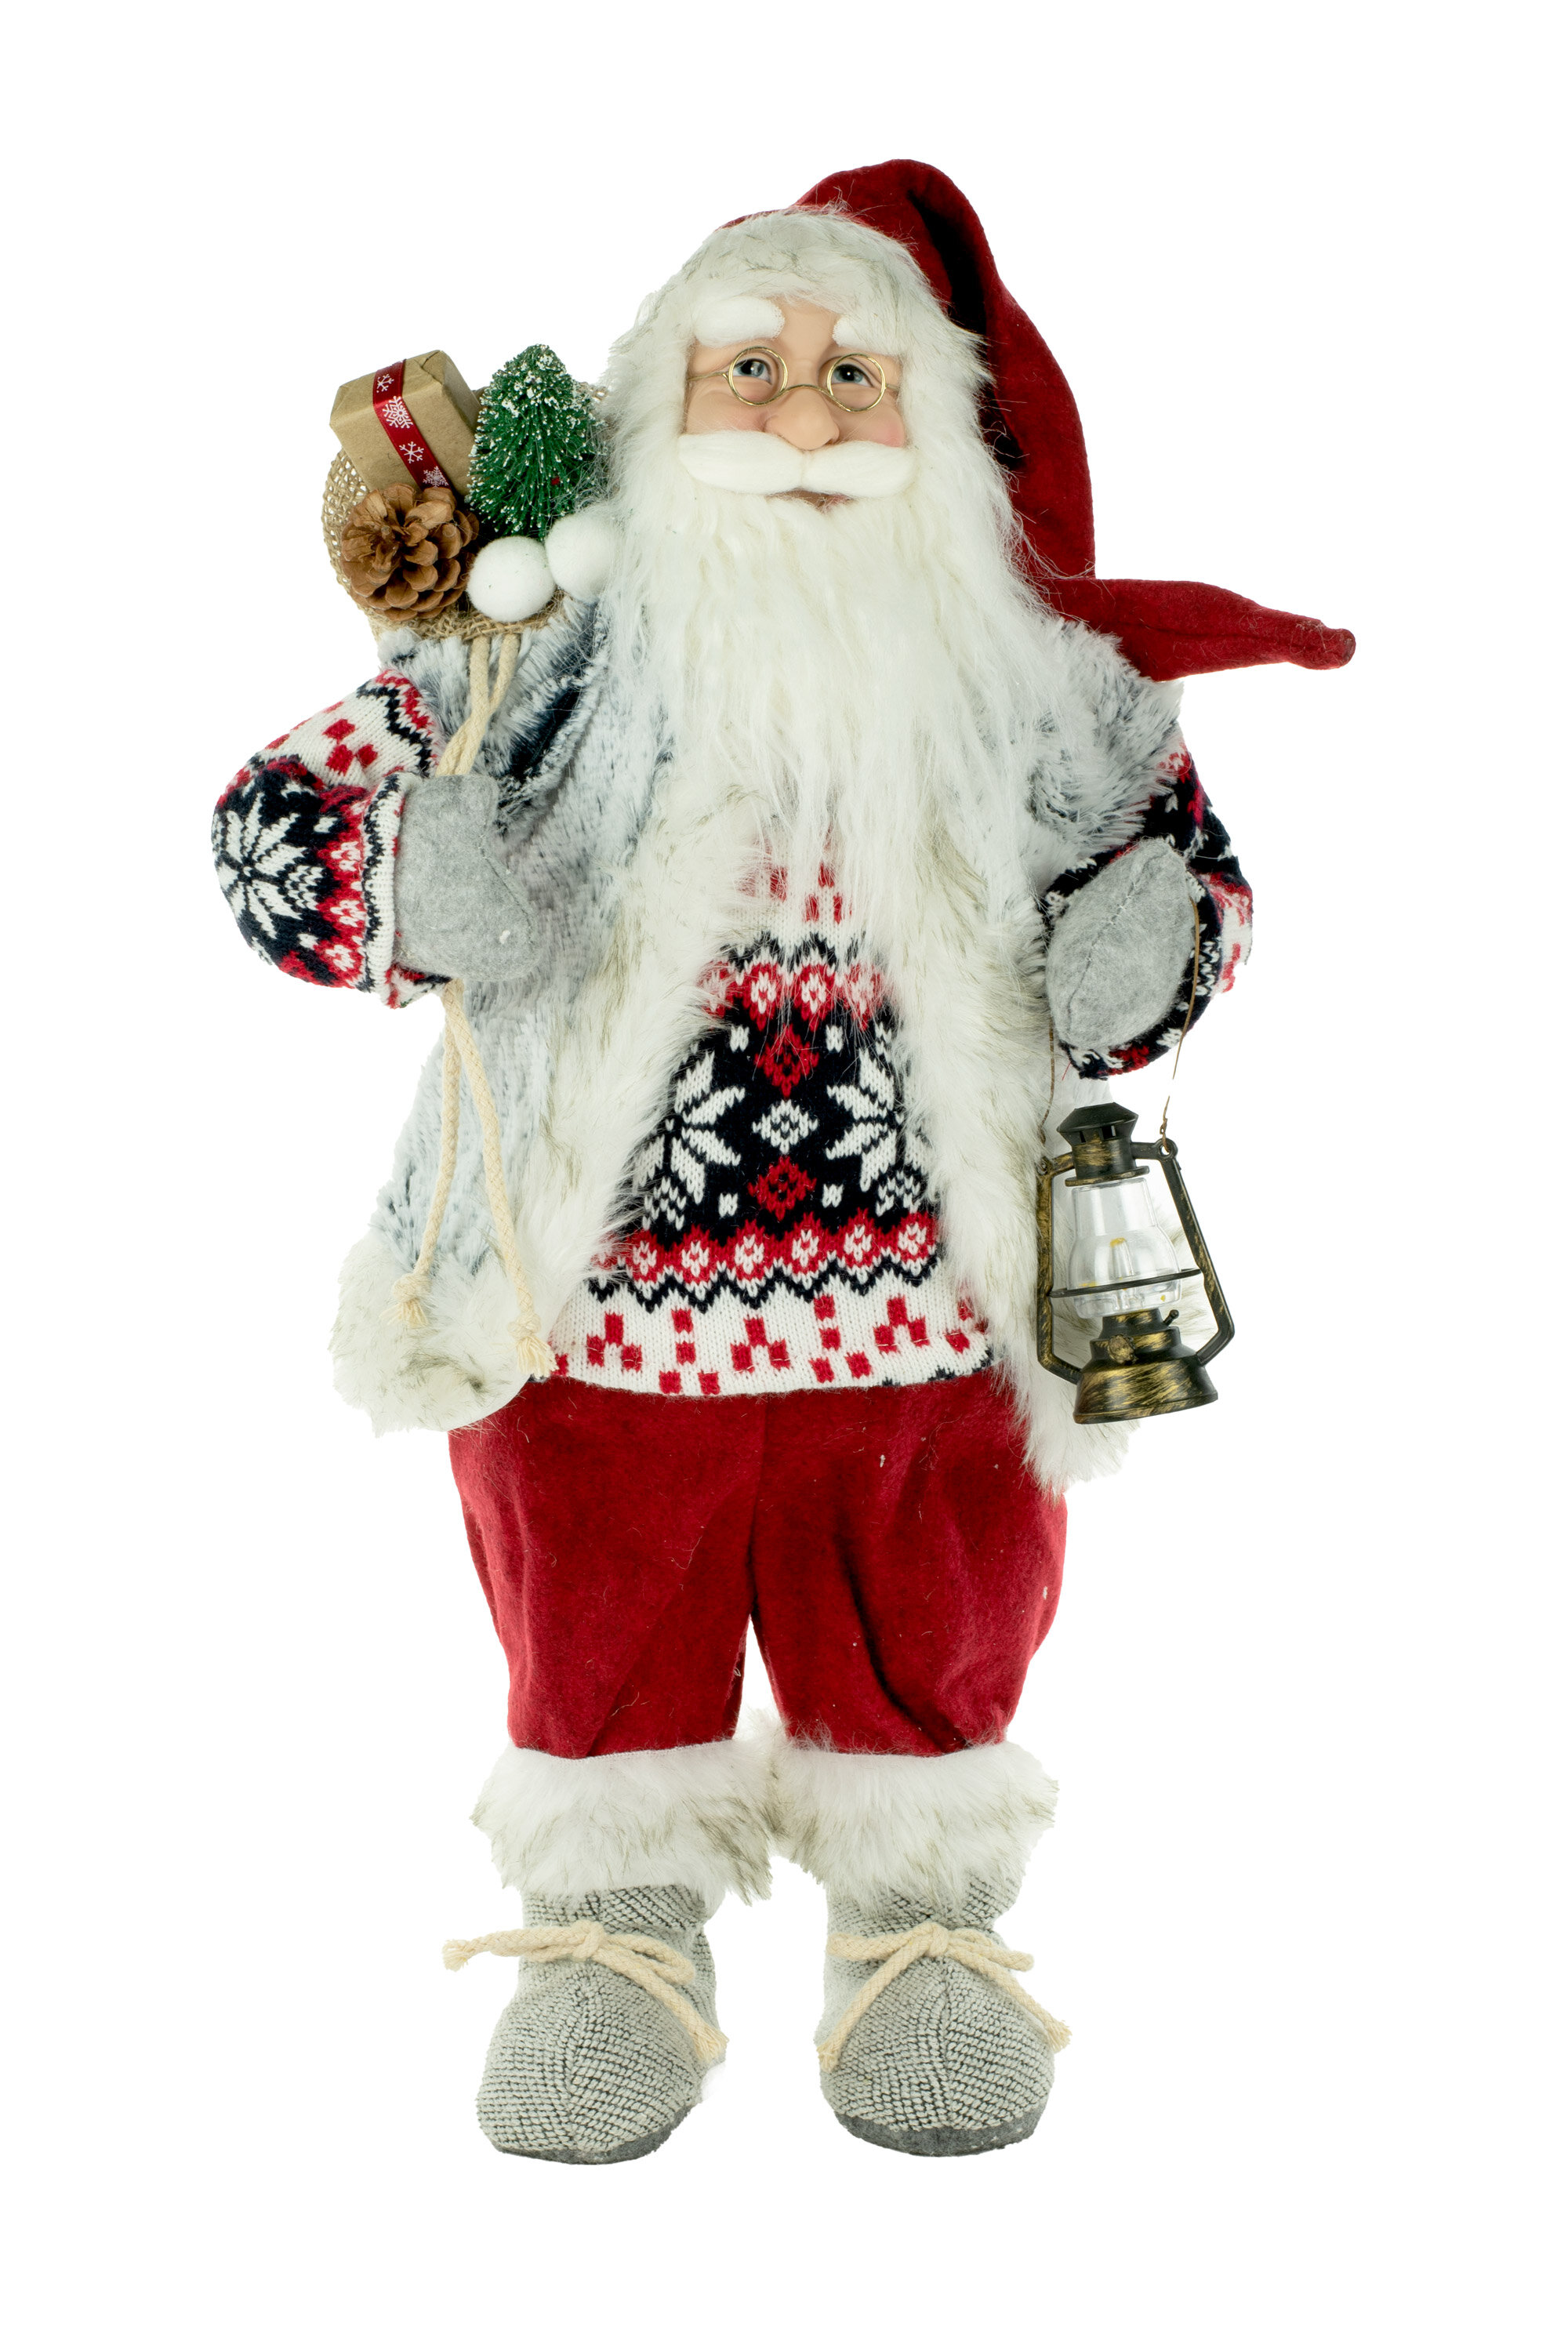 The Holiday Aisle Fabric Standing Festive Santa Claus With Christmas Sweater Wayfair